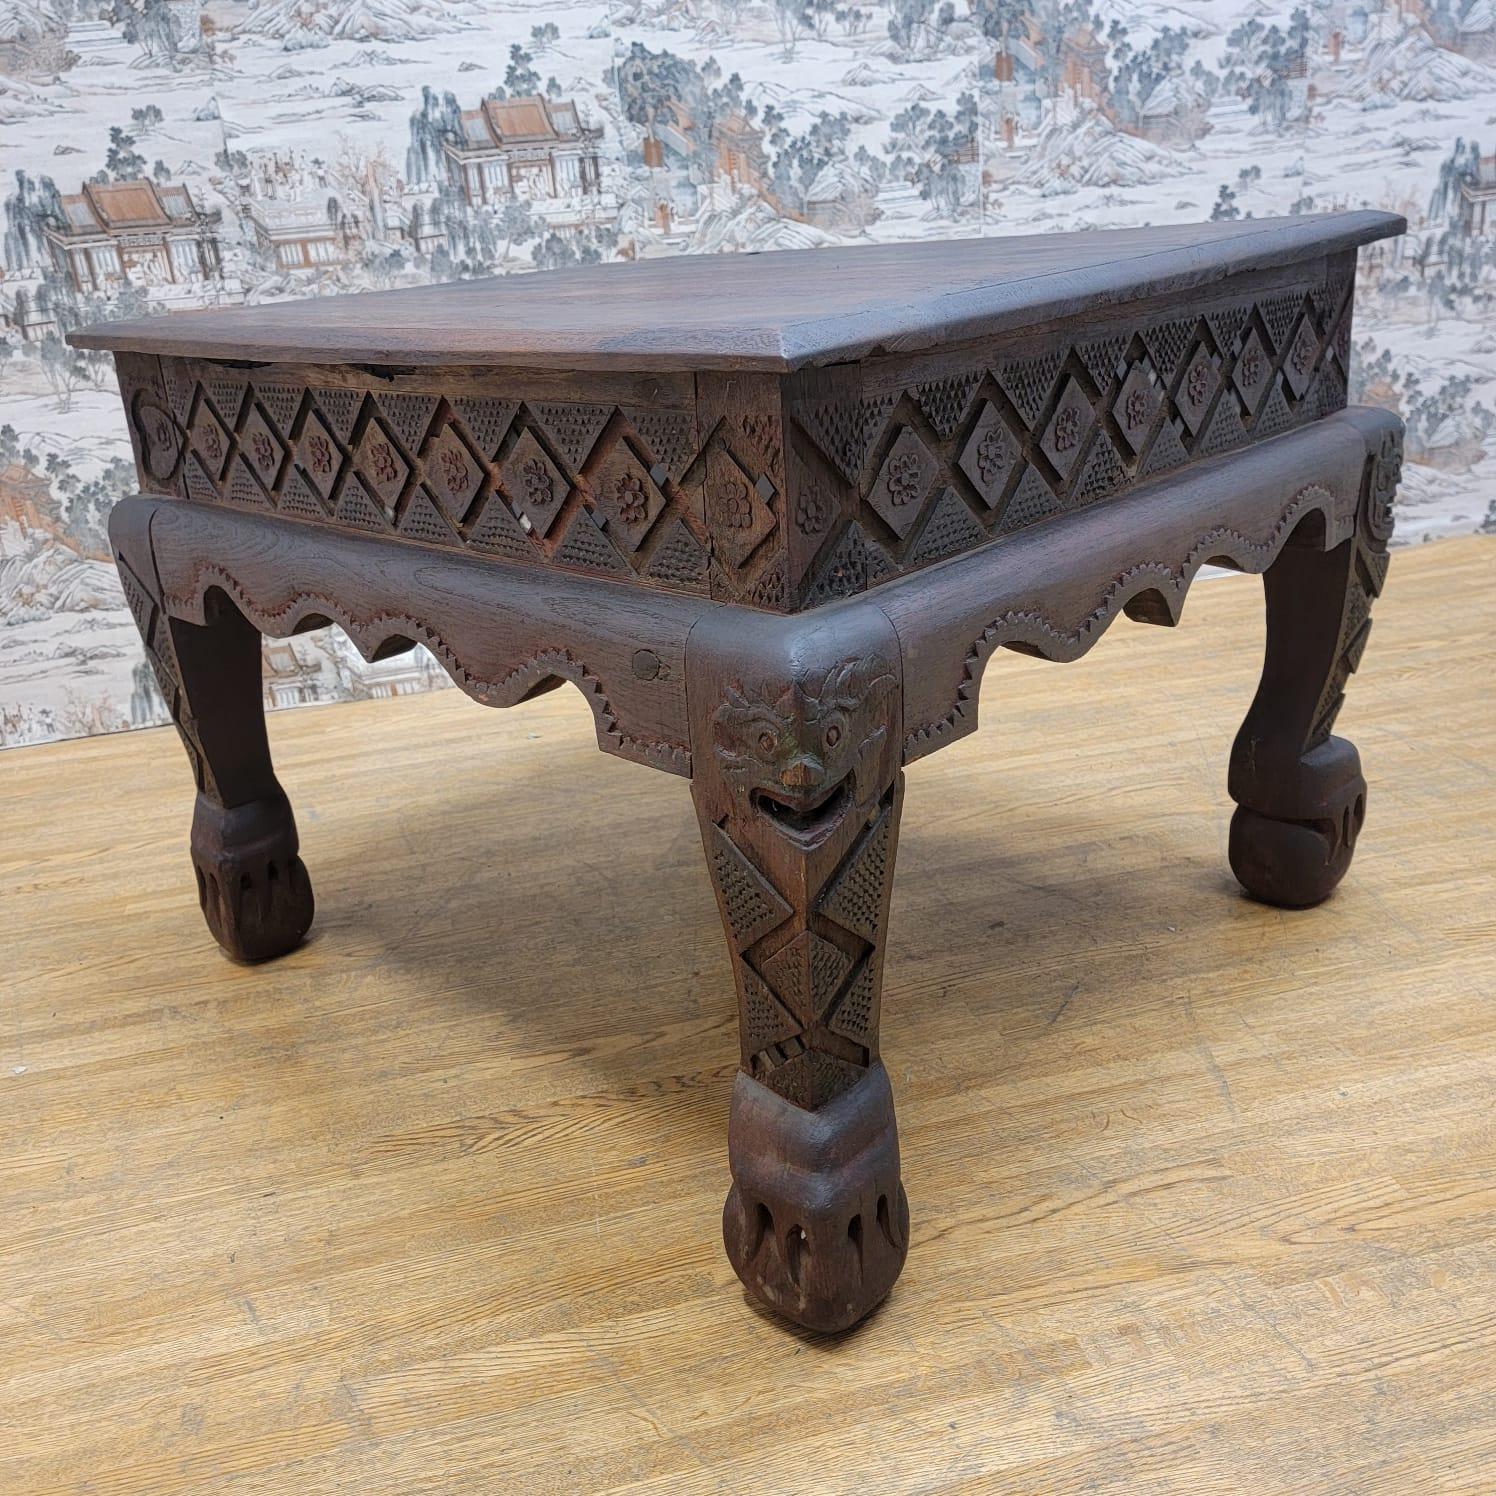 Antique East Indian Teak Wood Square Side Table with Carved Legs and Apron For Sale 4